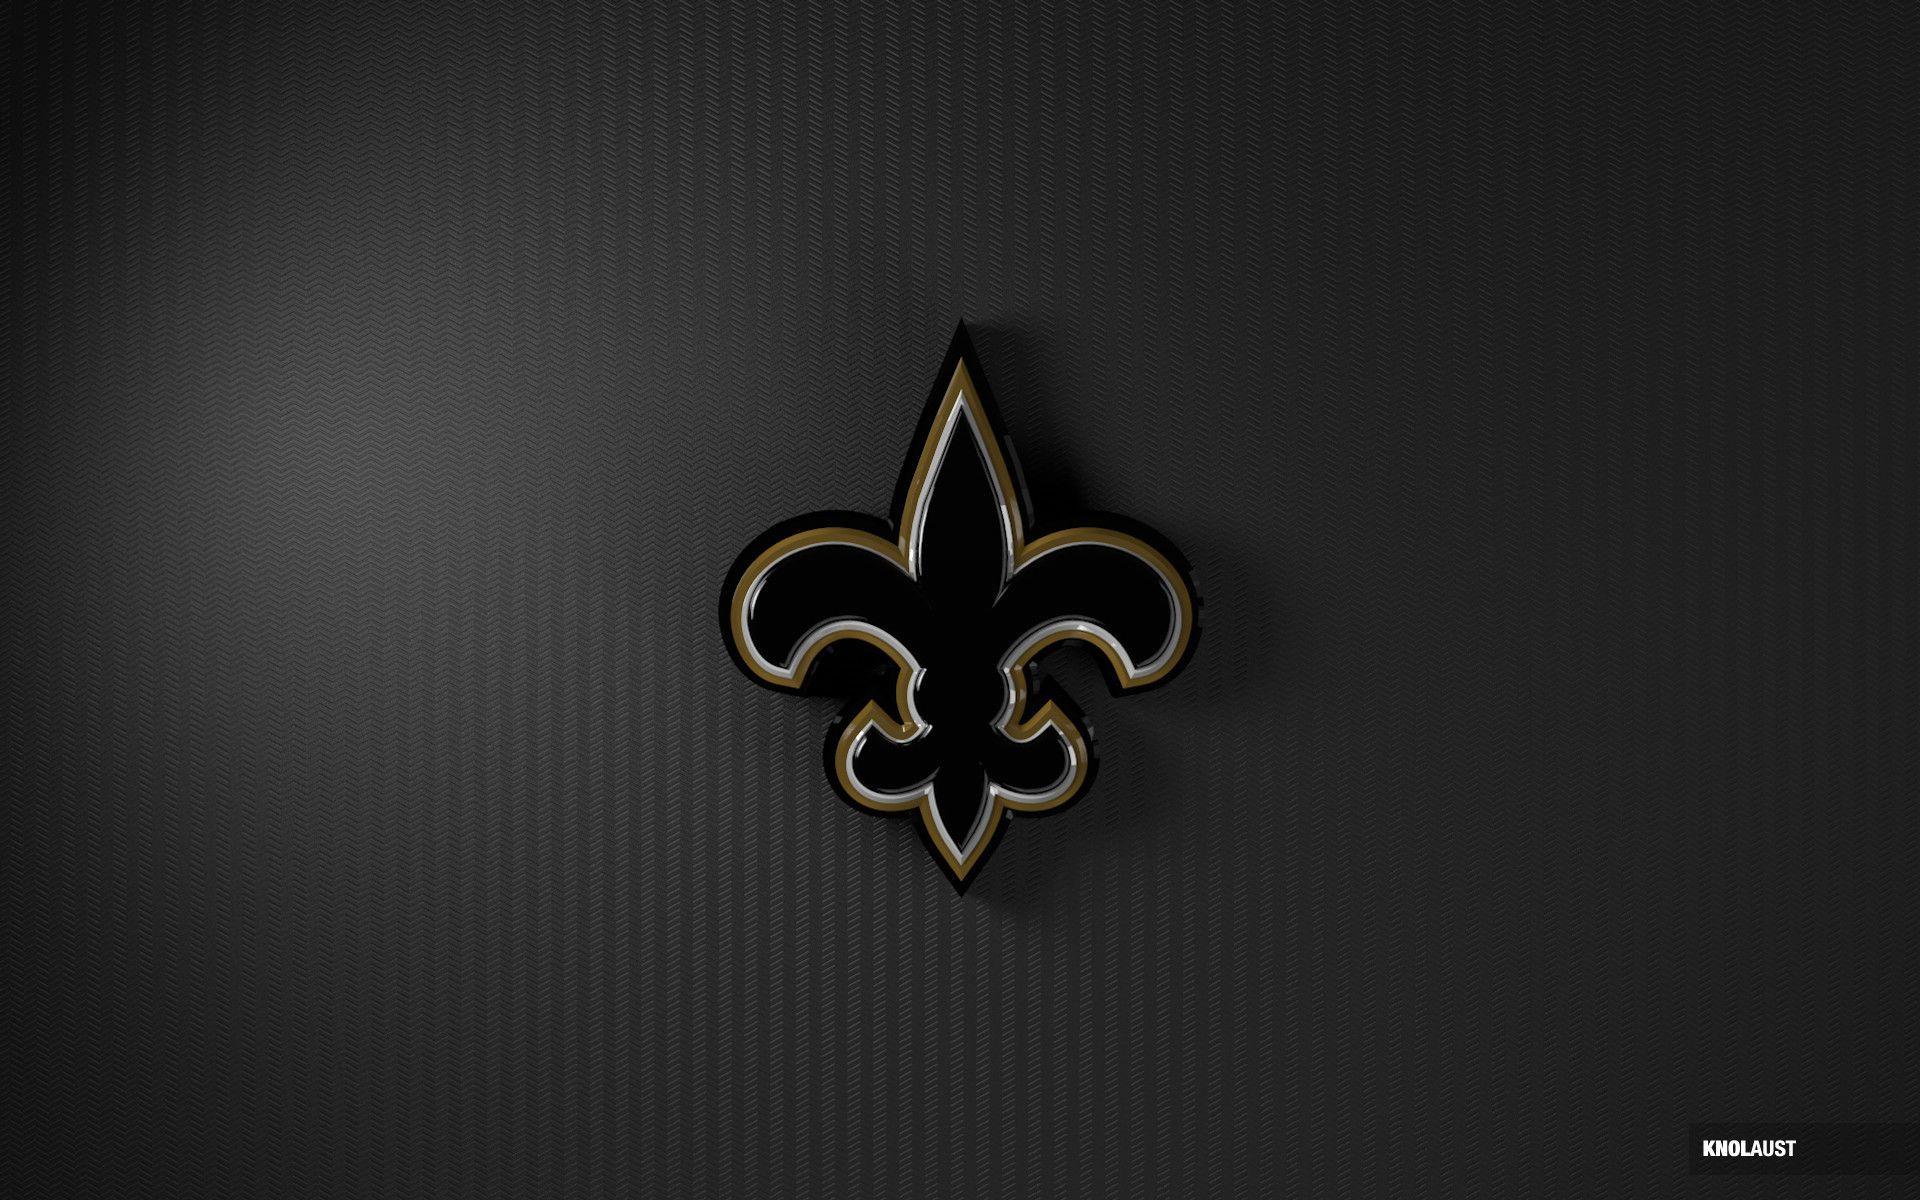 Awesome New Orleans Saints wallpaper. New Orleans Saints wallpaper